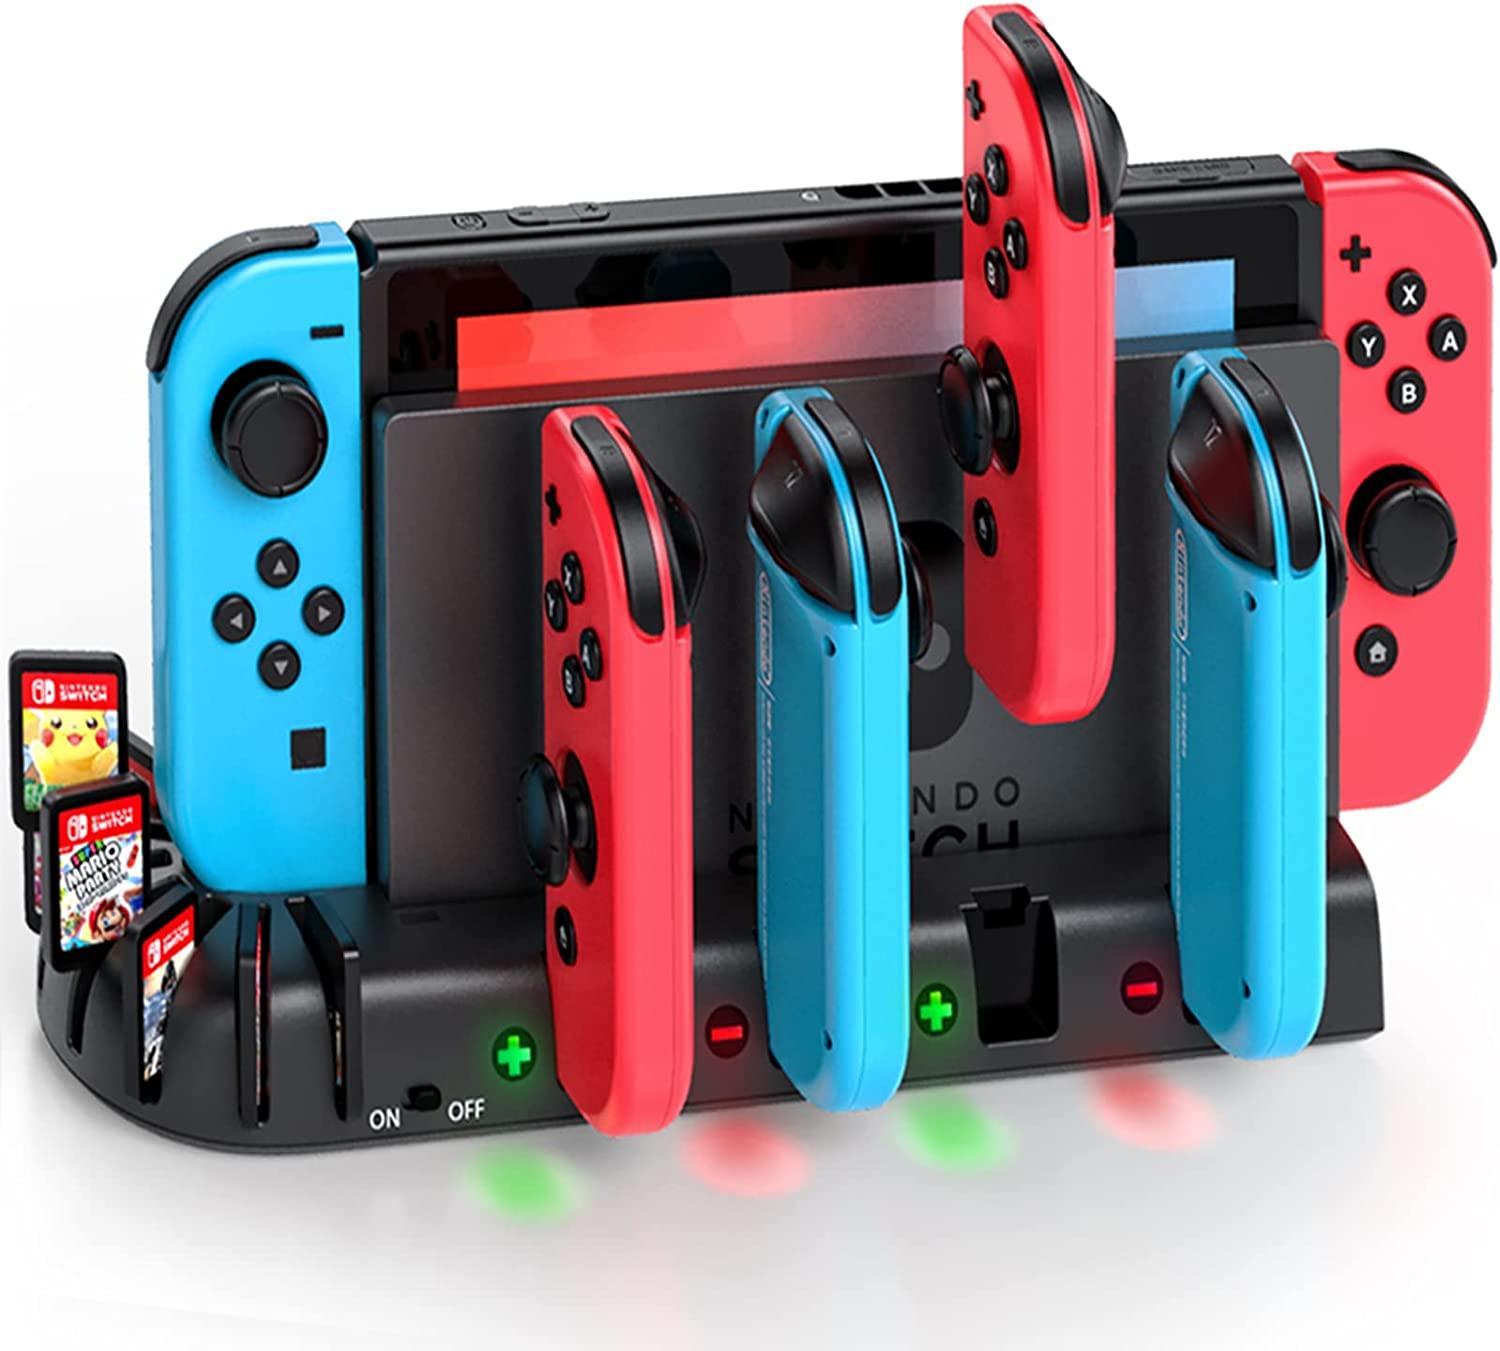 Nintendo Switch Controller Charging Dock Station Extension for $12.29